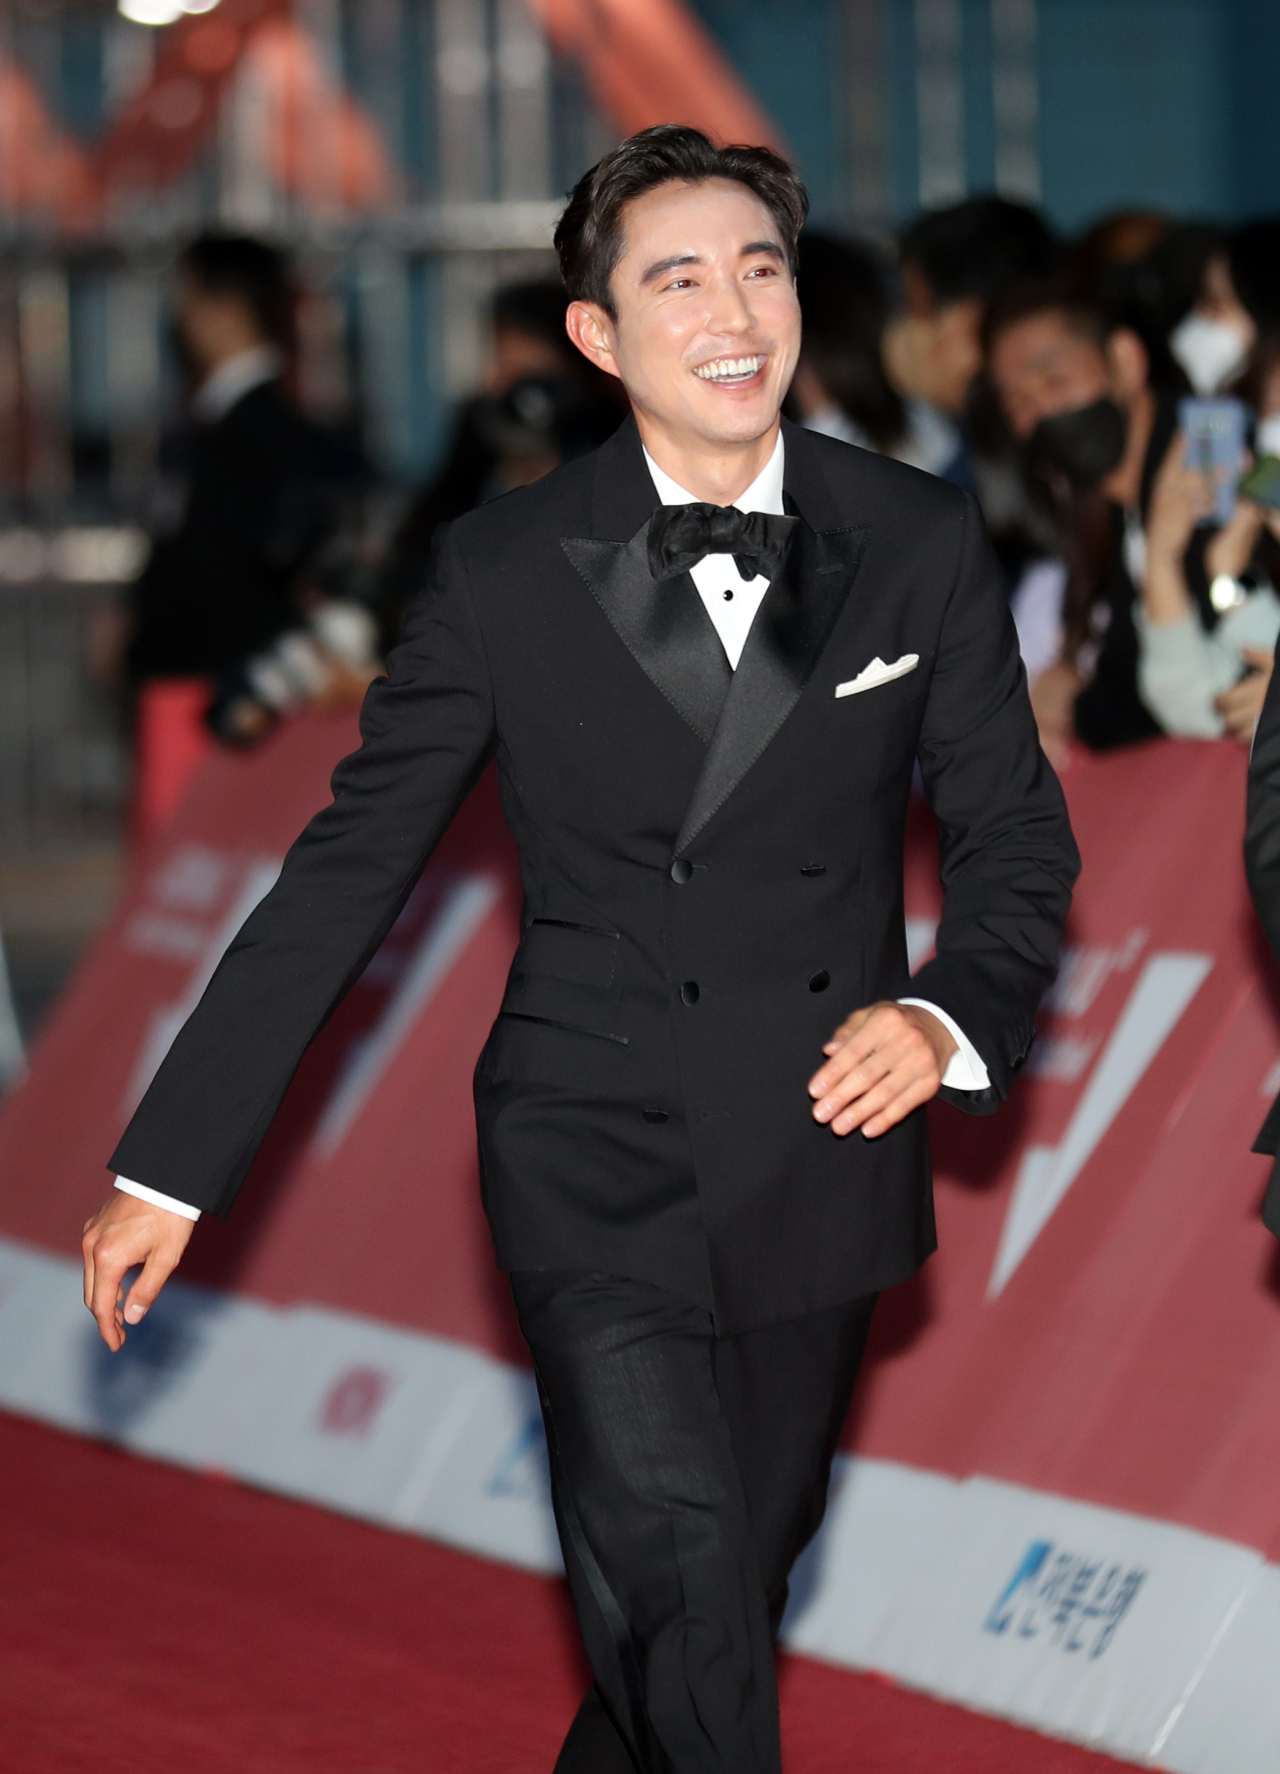 Actor Justin H. Min, who played Yang in the Jeonju International Film Festival opener “After Yang” walks the red carpet during the opening ceremony on Thursday. (Yonhap)